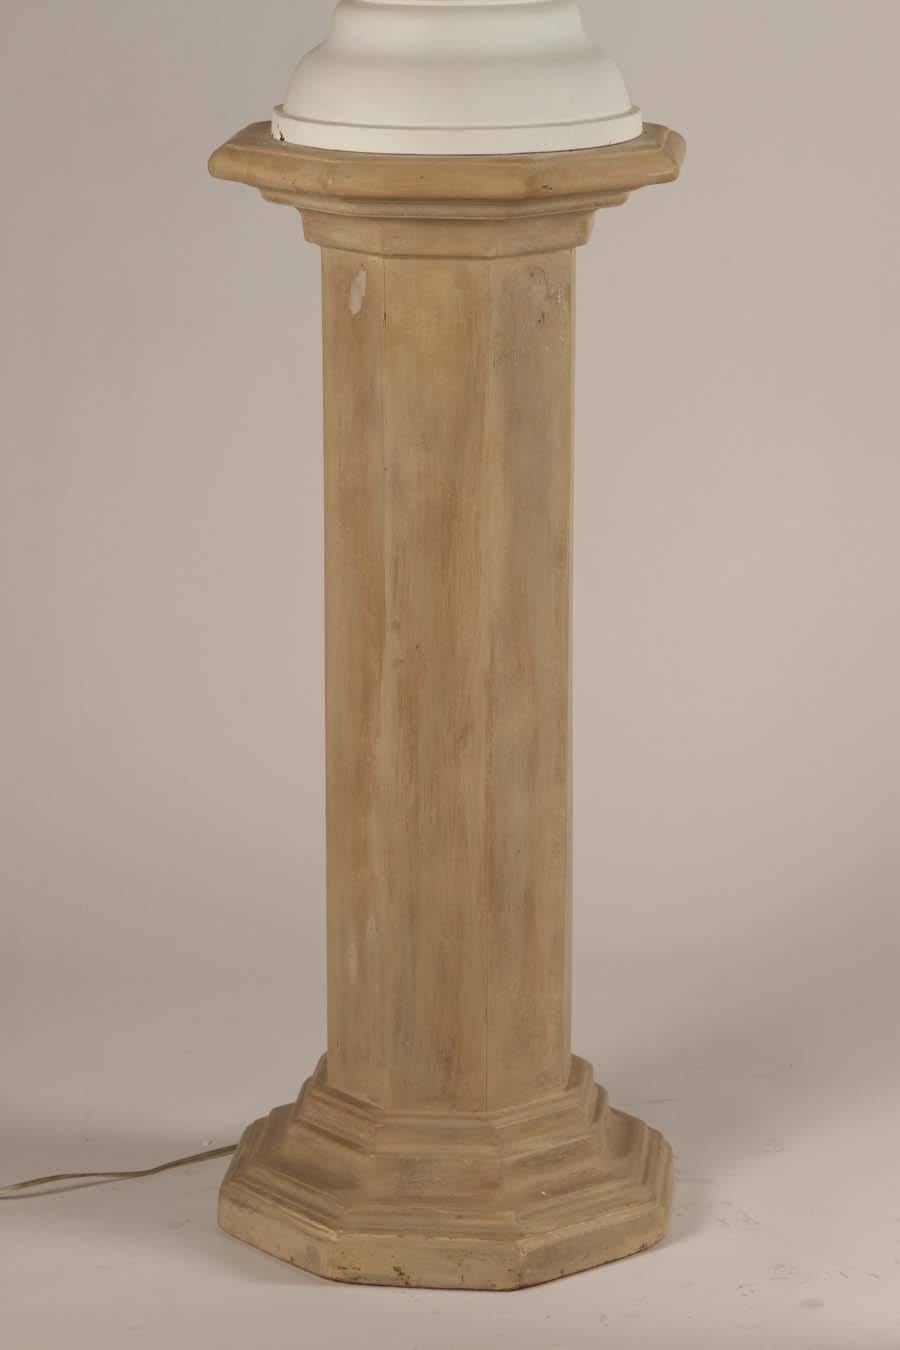 Pair of Urns on Columns Light Fixtures In Excellent Condition For Sale In Los Angeles, CA